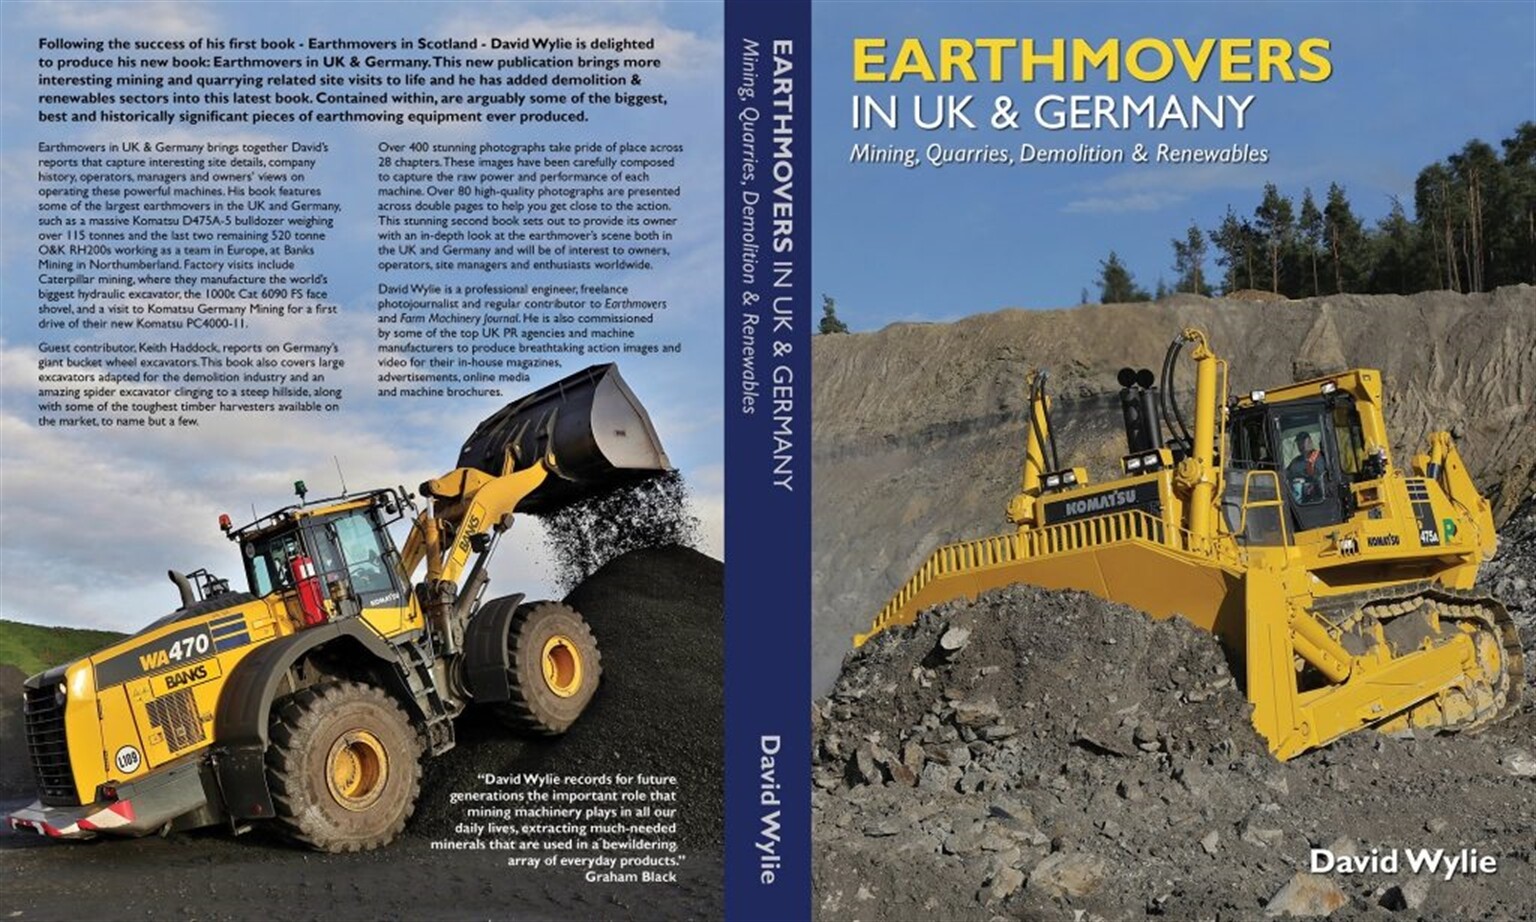 Construction Machinery author David Wylie prepares to release new Earthmoving and Mining book in 2019